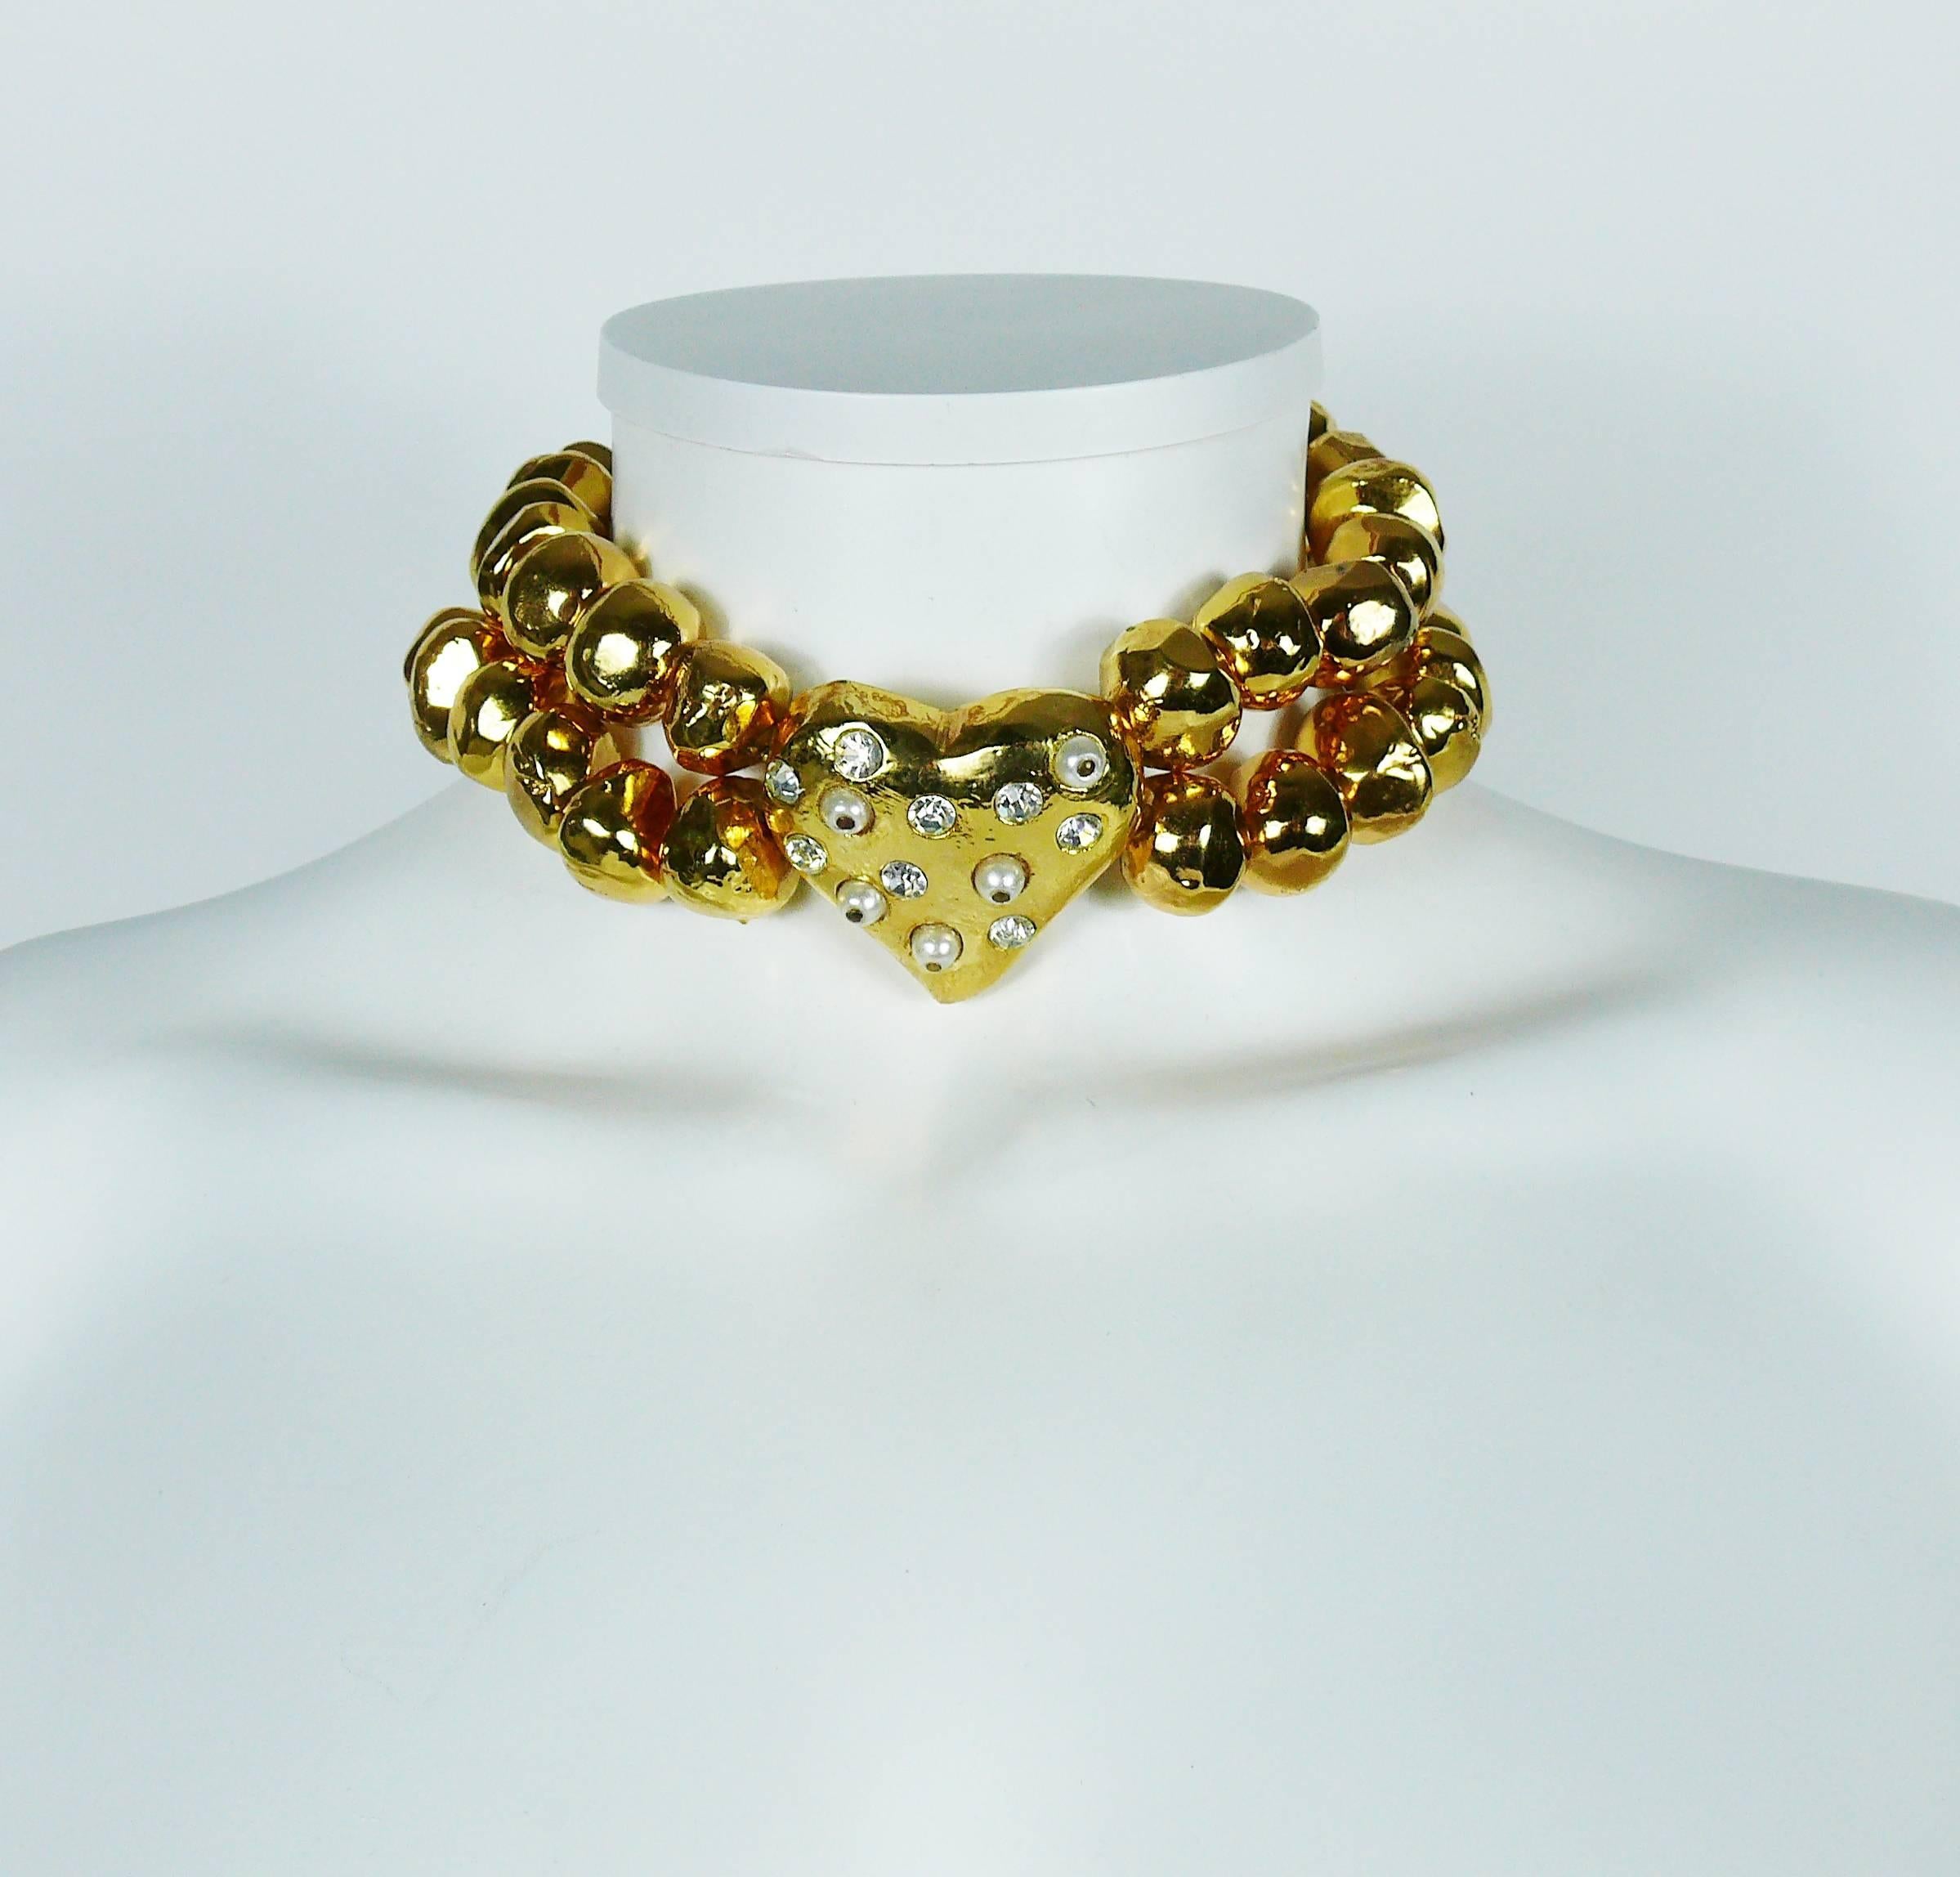 CHRISTIAN LACROIX vintage choker featuring large irregular resin nugget like beads and a heart at center embellished with faux pearls and clear crystals.

Embossed CL.
CHRISTIAN LACROIX oval metal tag was probably lost (a mark is still visible on